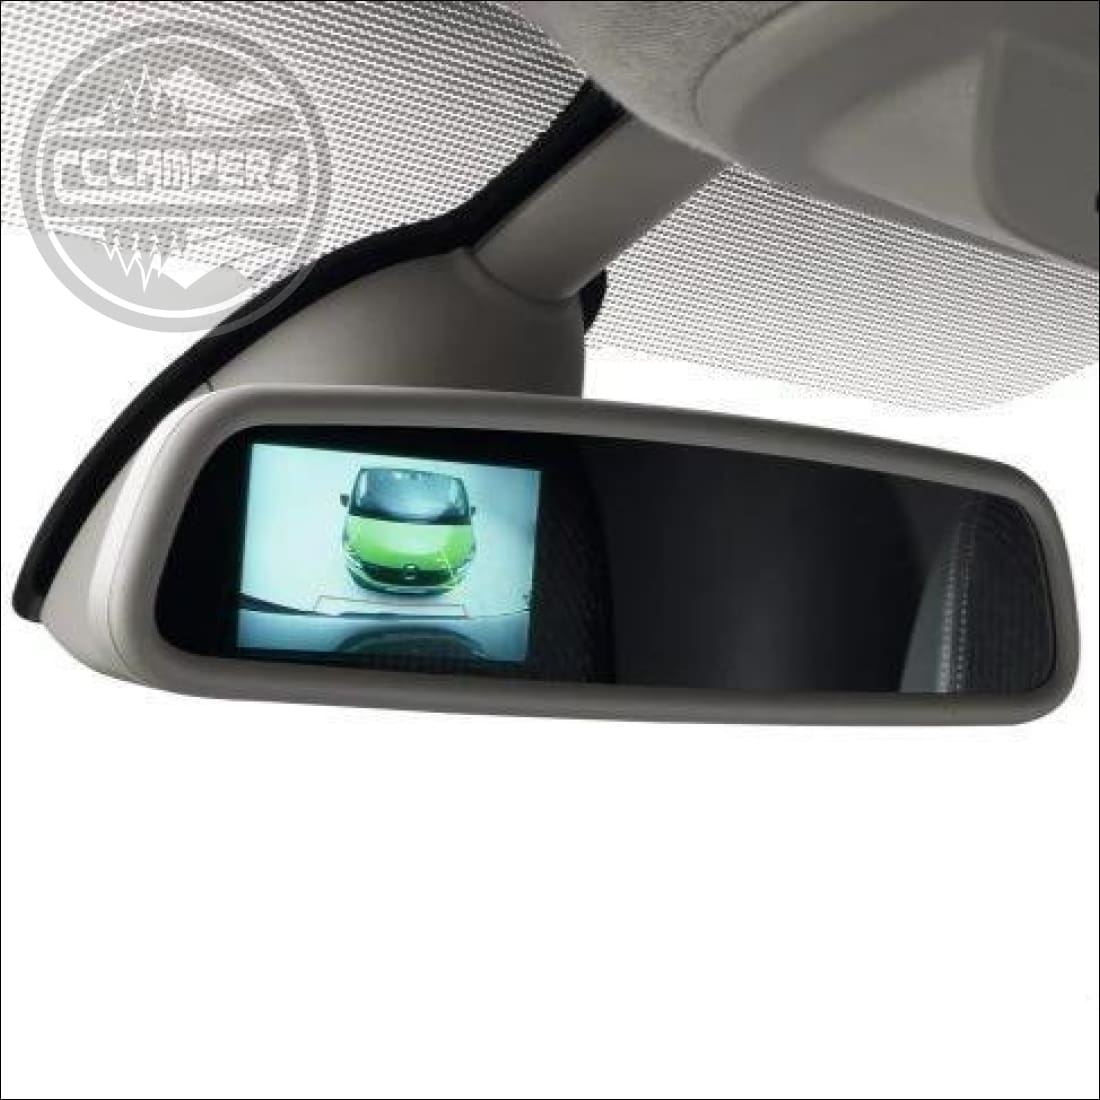 New Renault Trafic Factory fitted Rear parking camera option - CCCAMPERS 